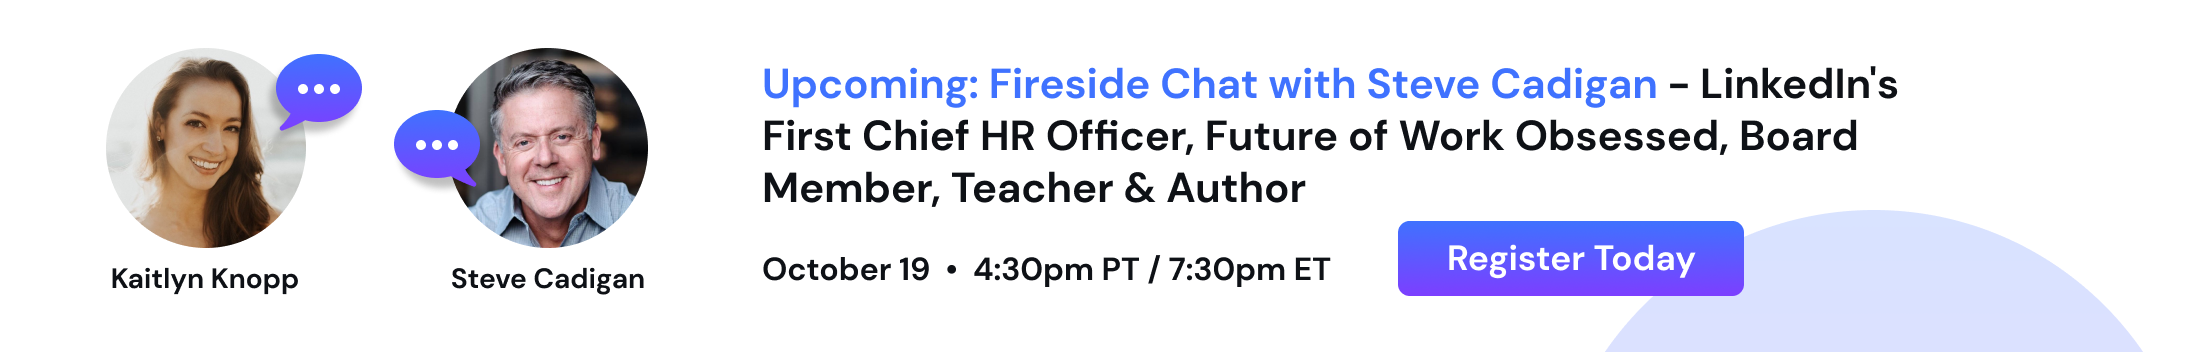 Upcoming: Fireside Chat with Steve Cadigan - LinkedIn's First Chief HR Officer, Future of Work Obsessed, Board Member, Teacher & Author